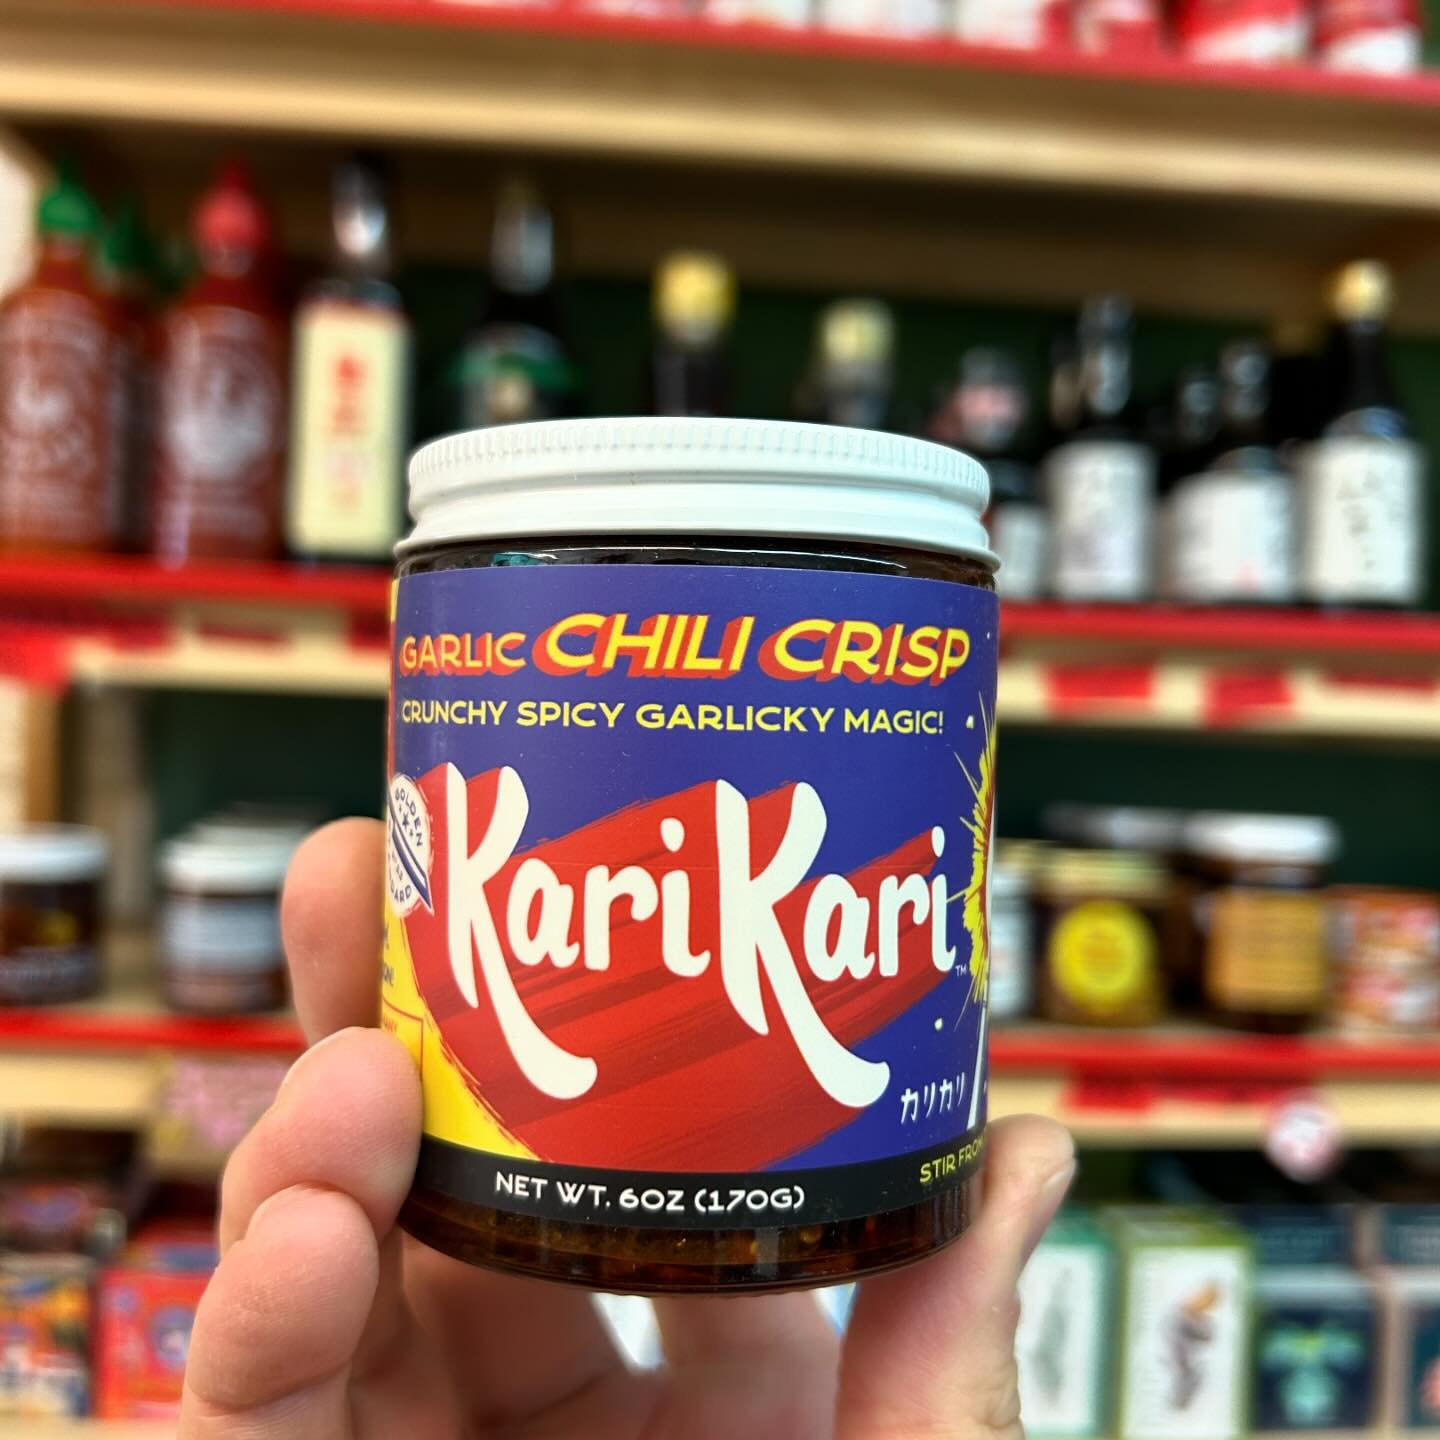 Some pantry items from around the shop that we love
.
We&rsquo;ll be making some space on the shelves for new smaller chili CRUNCH &trade;️ jars. We&rsquo;ll also be putting some other items on sale that are great, but just don&rsquo;t seem to be as 